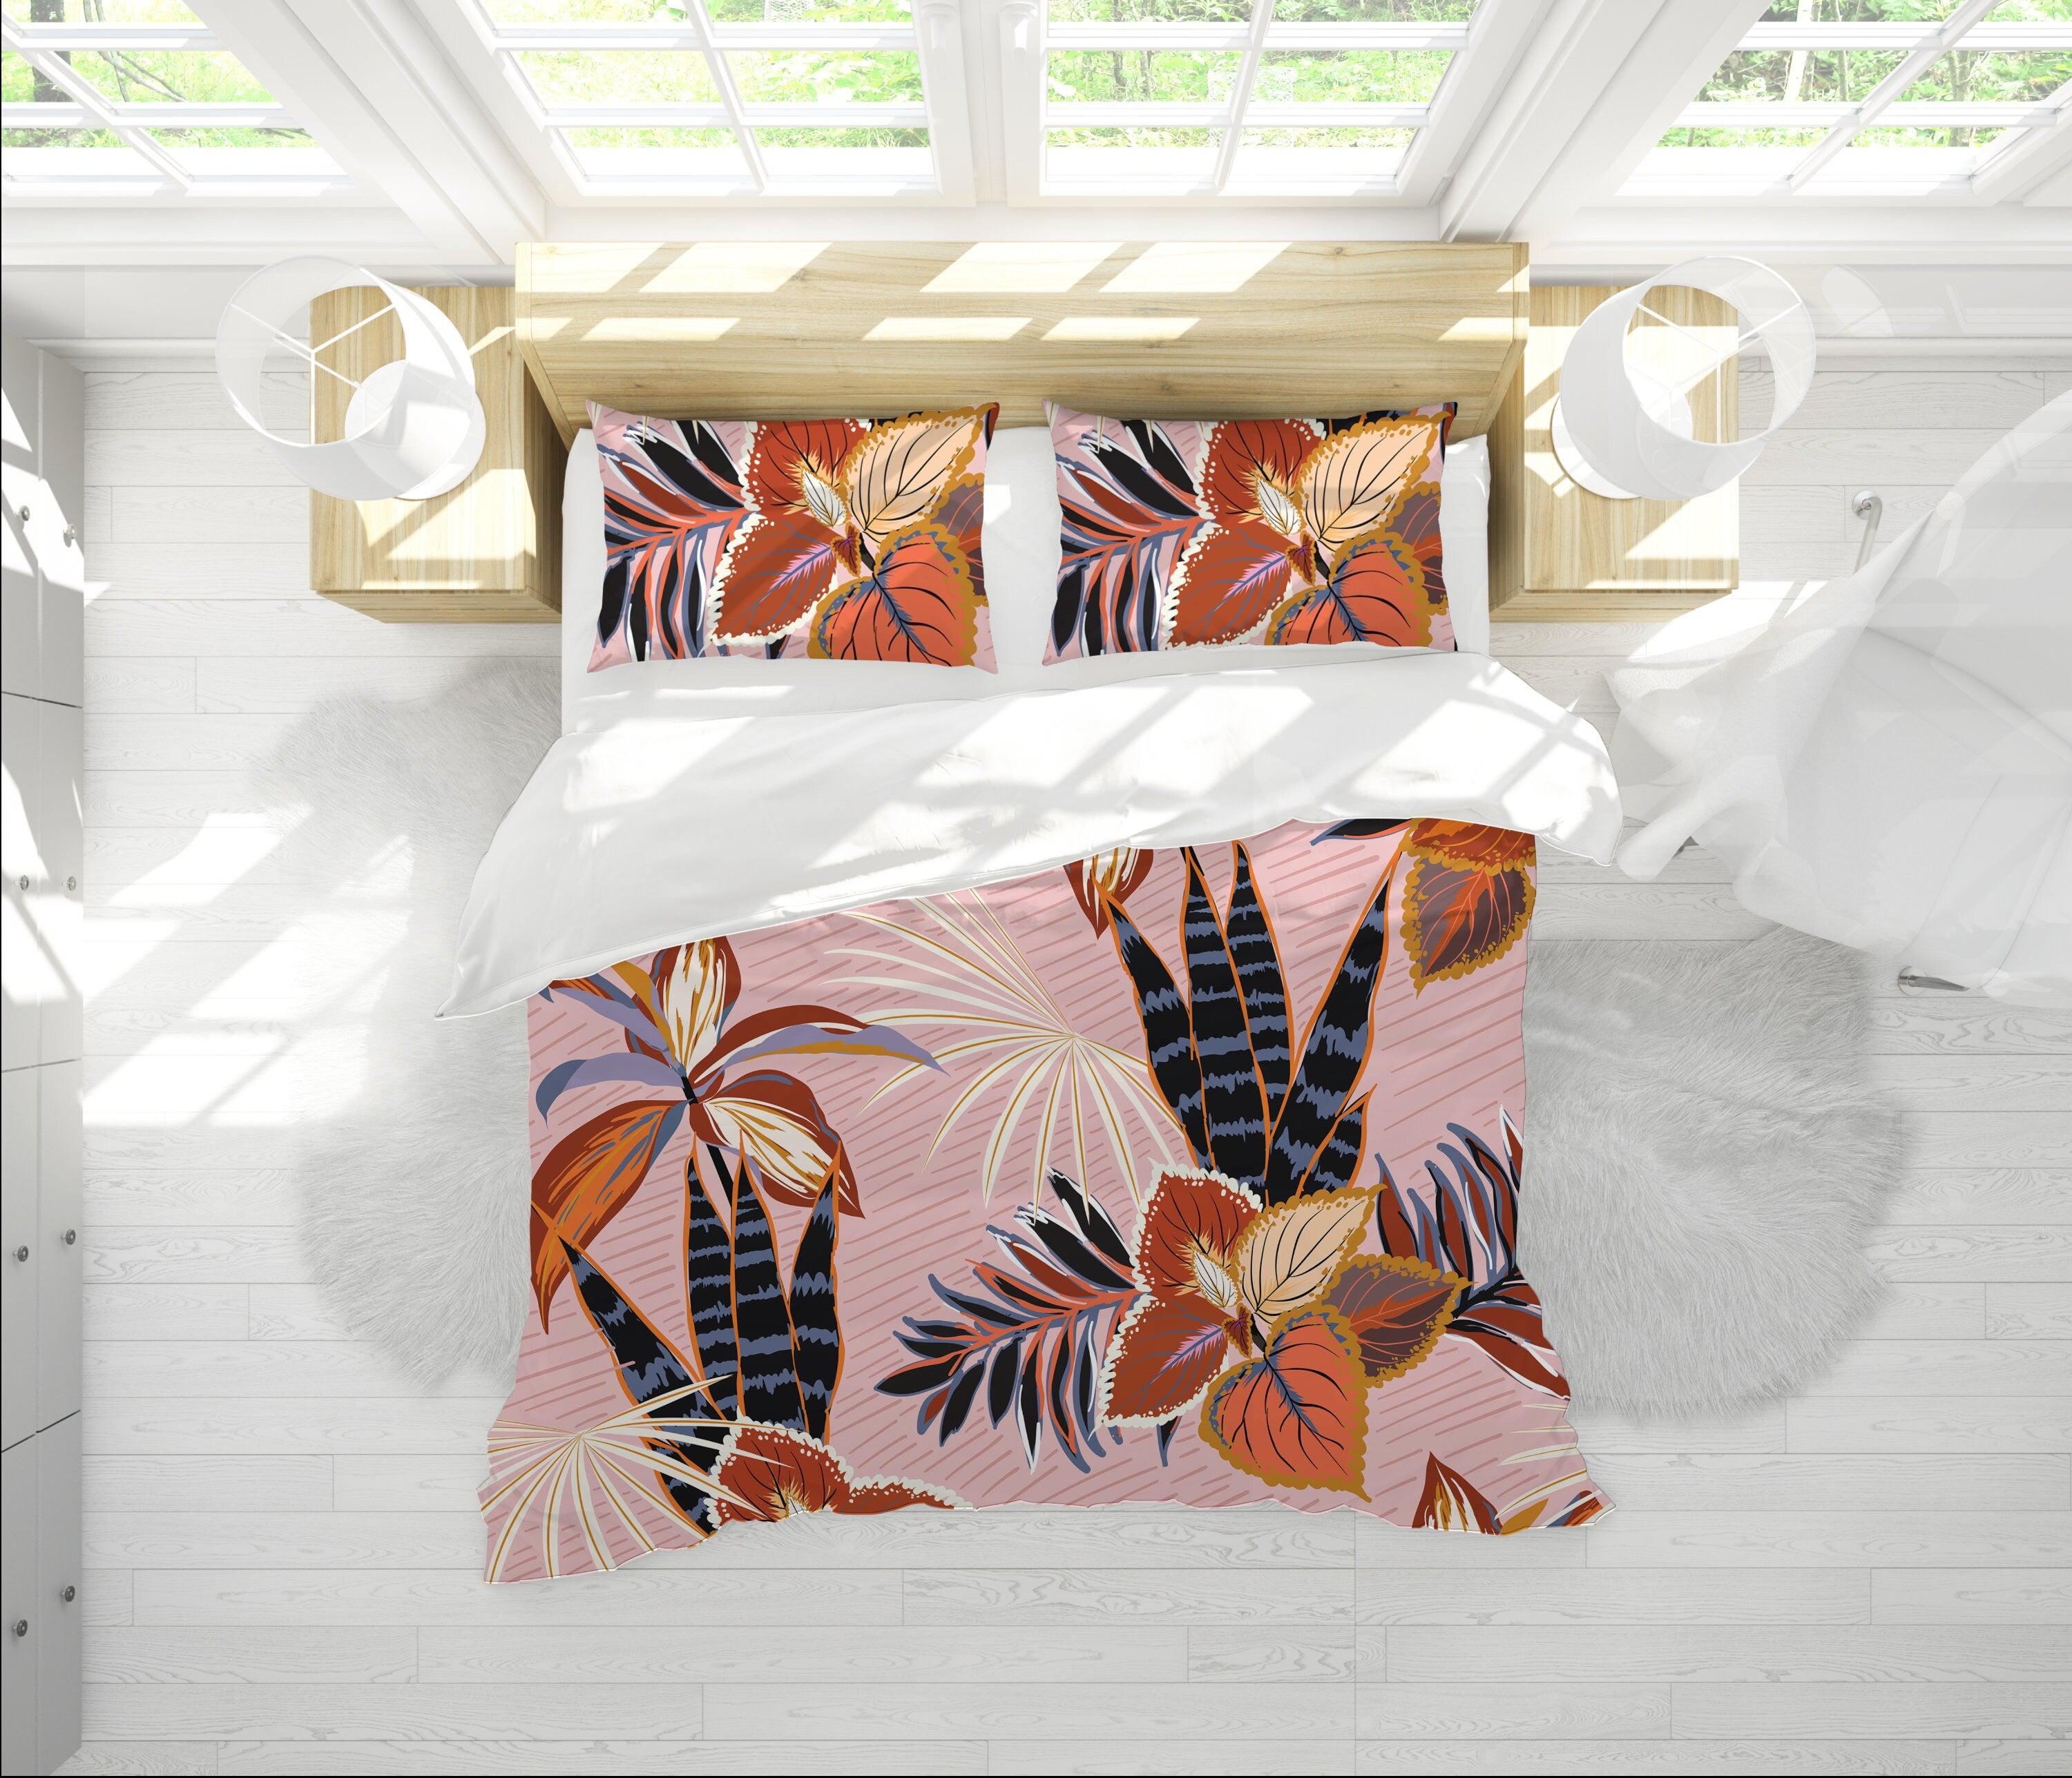 daintyduvet Tropical Theme Duvet Cover Set with Pillow Case | Peach Pink Bedding Set Full